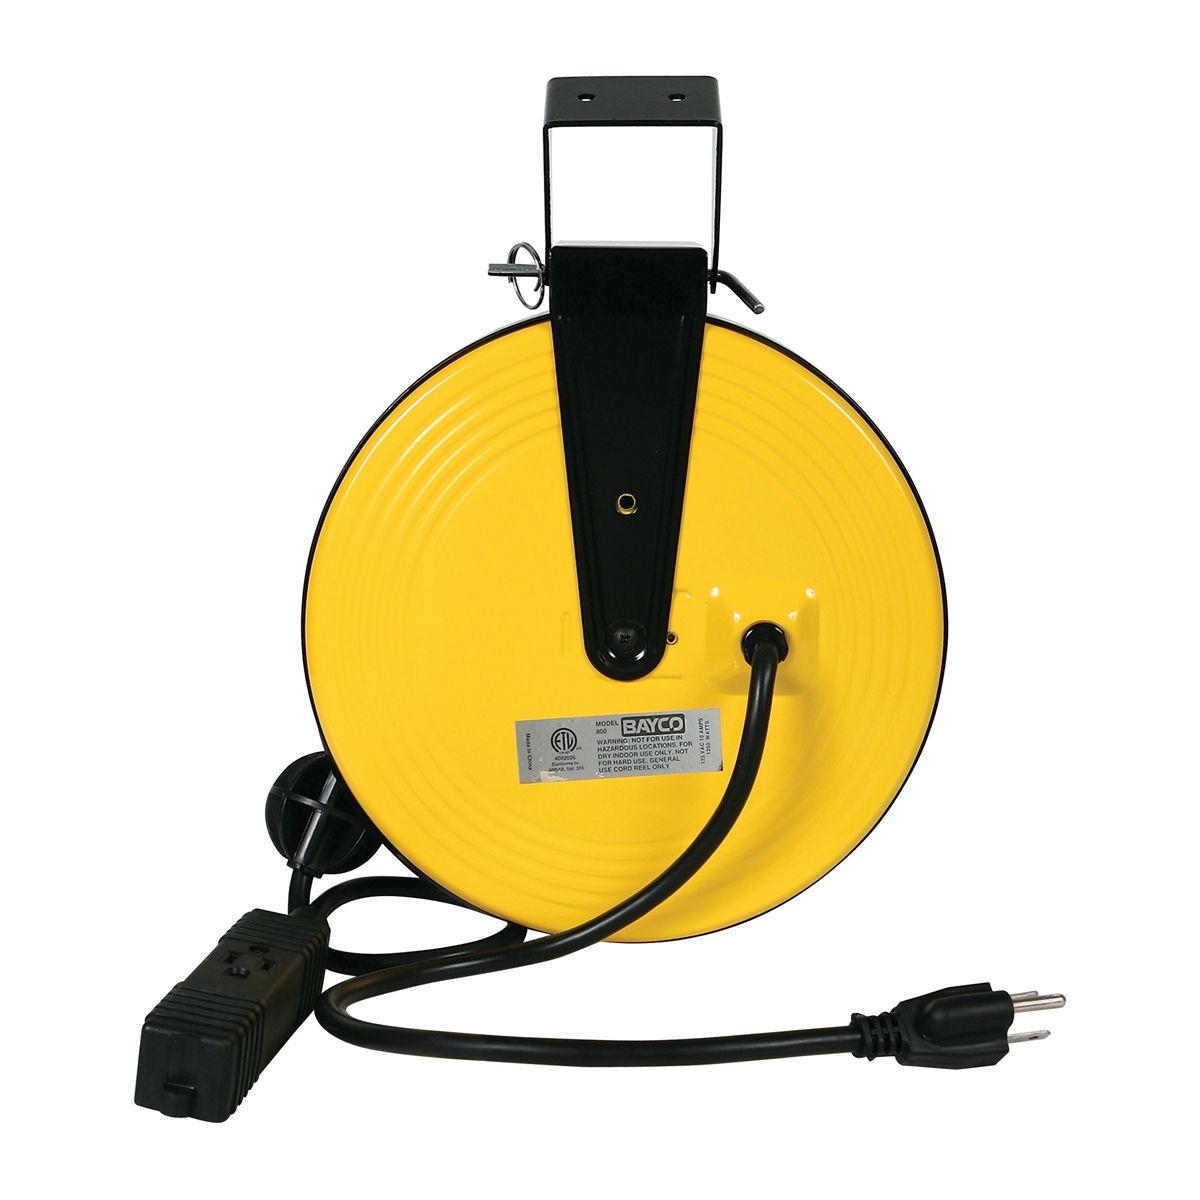 SL-800: 30ft Retractable Metal Cord Reel w/3 Outlets - 10amp